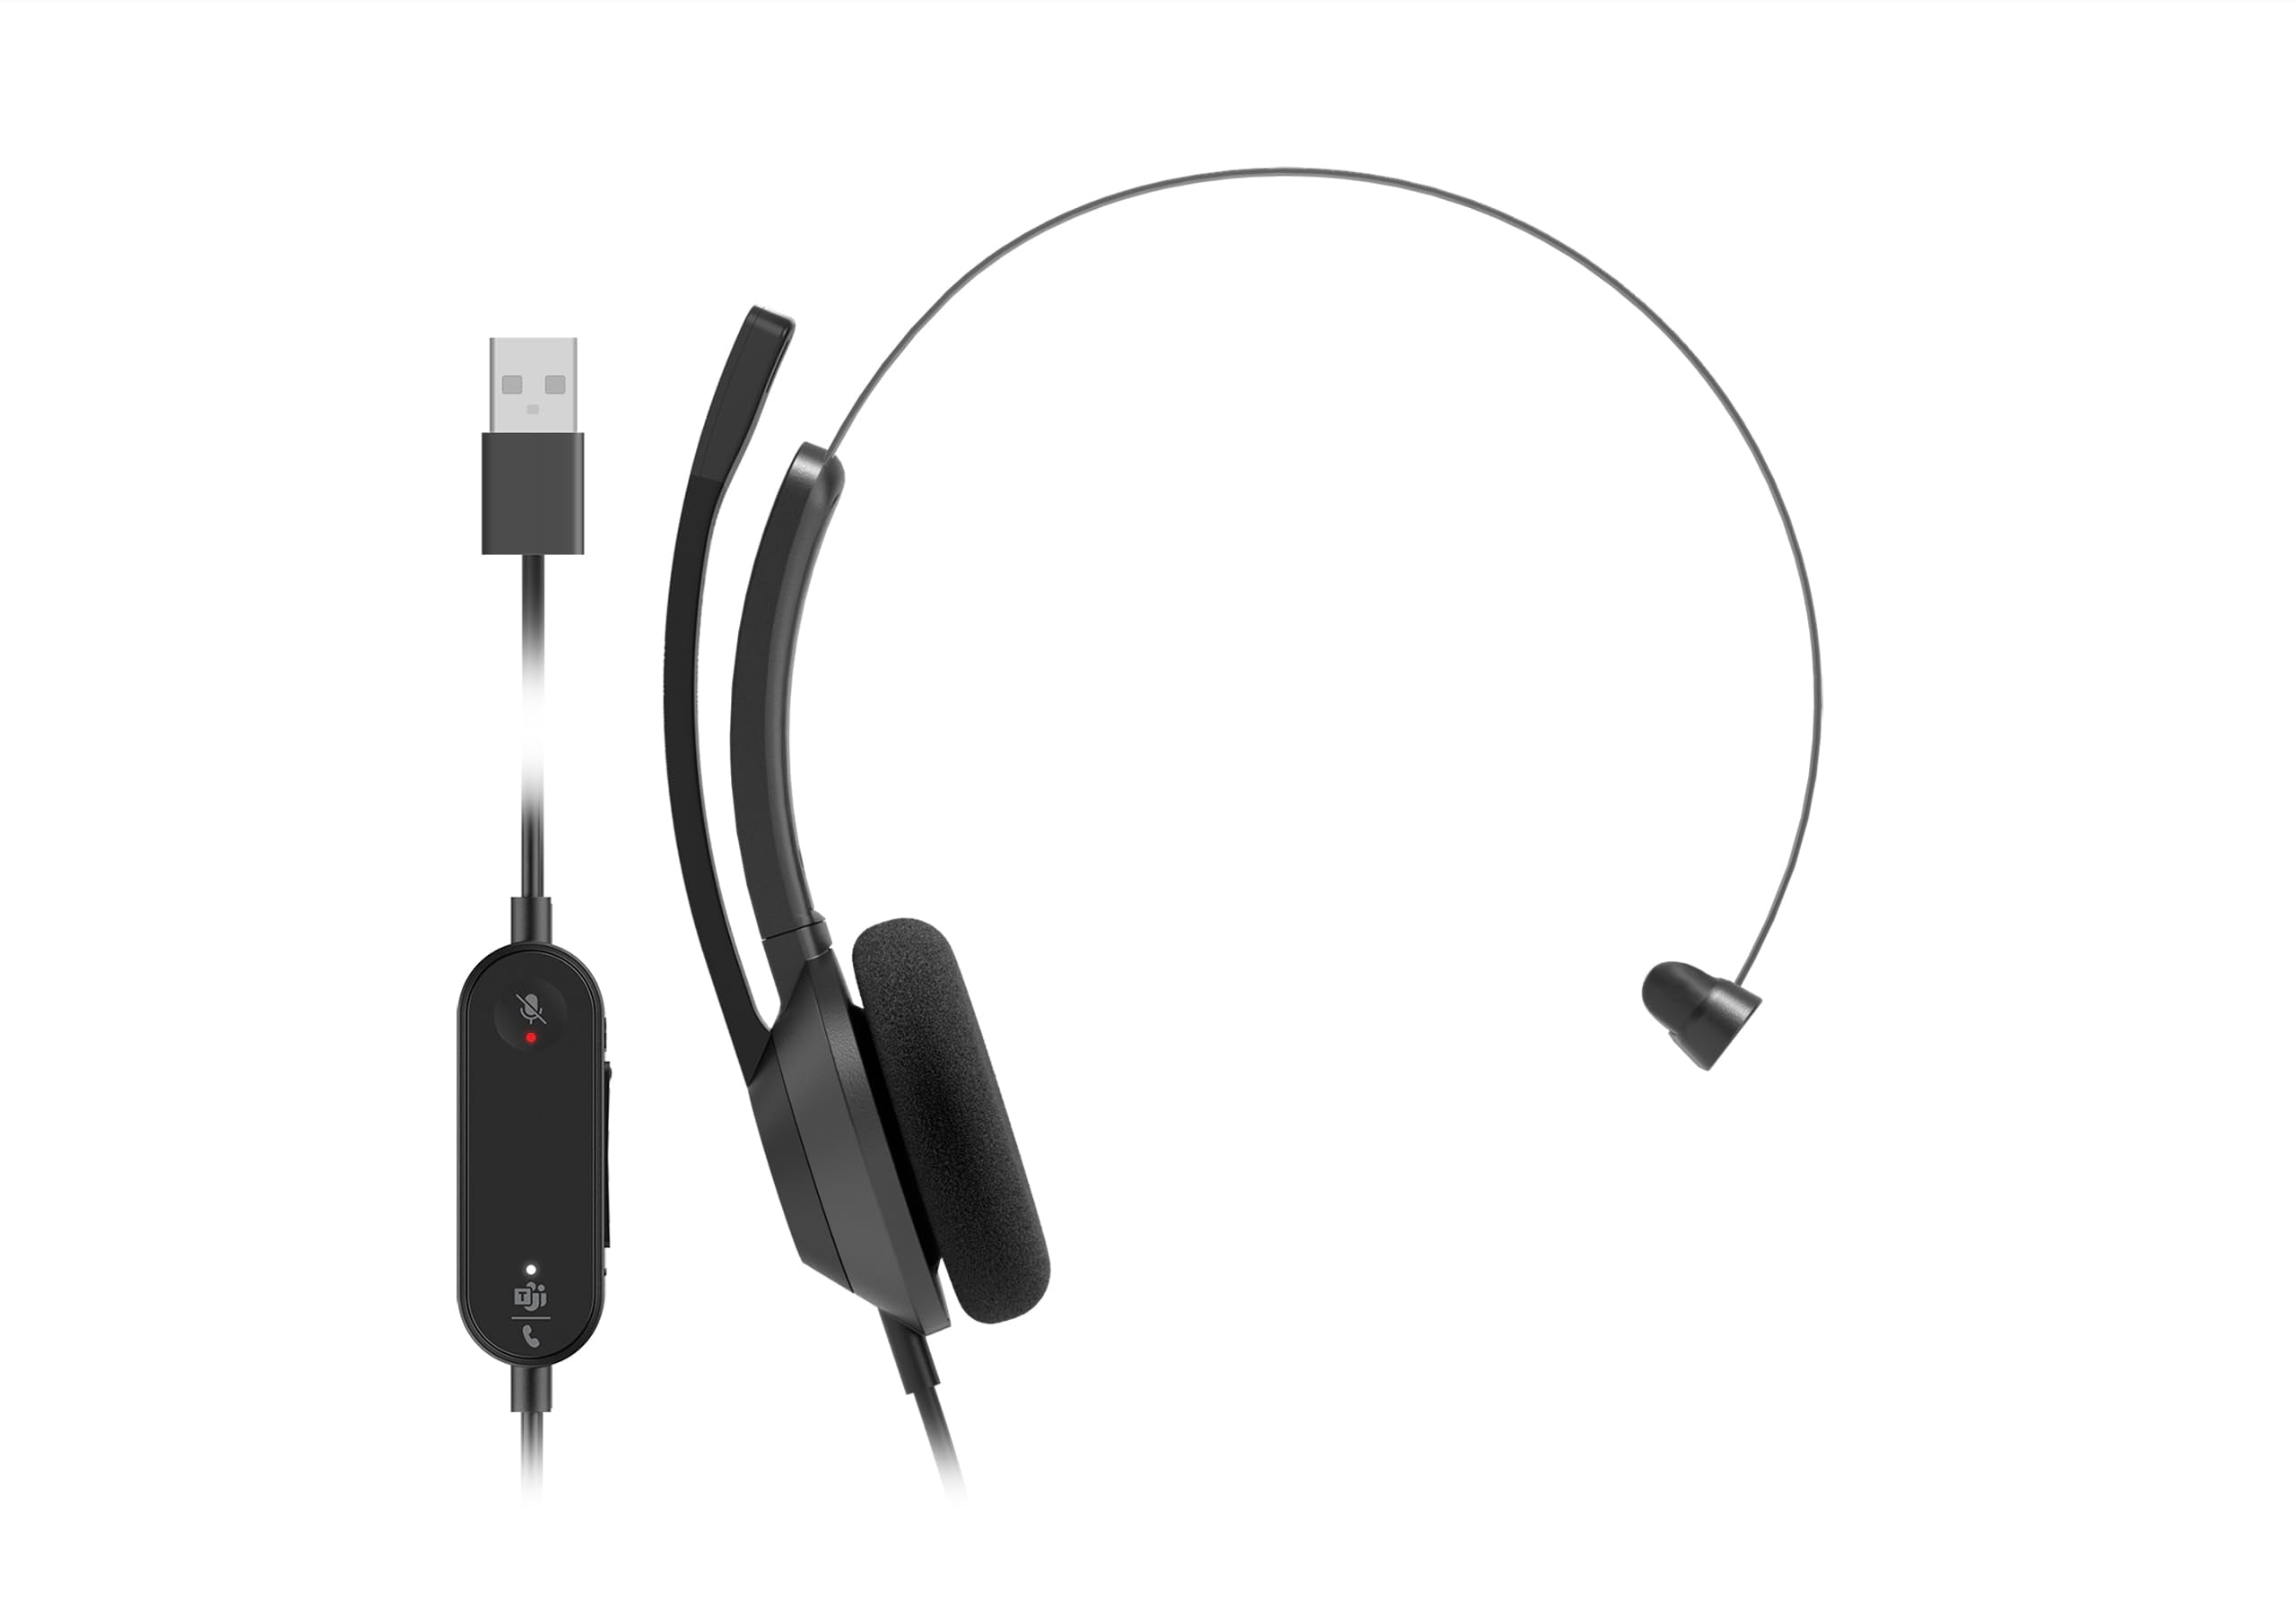 Picture of Cisco HS-W-321Q-C-USB 321 Wired Single Carbon Headset, Black